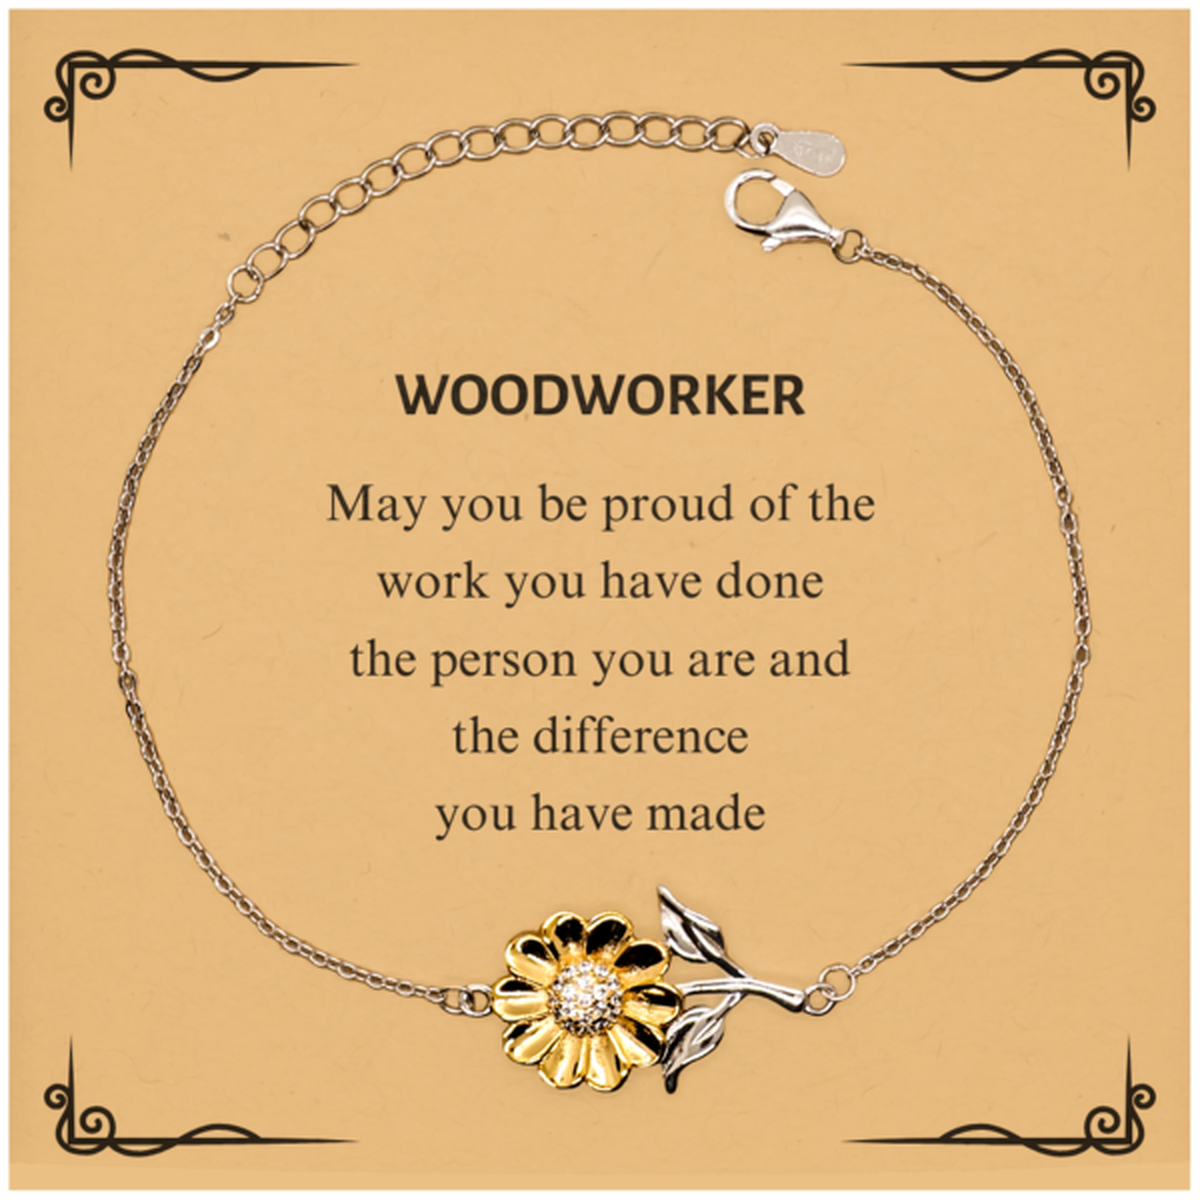 Woodworker May you be proud of the work you have done, Retirement Woodworker Sunflower Bracelet for Colleague Appreciation Gifts Amazing for Woodworker